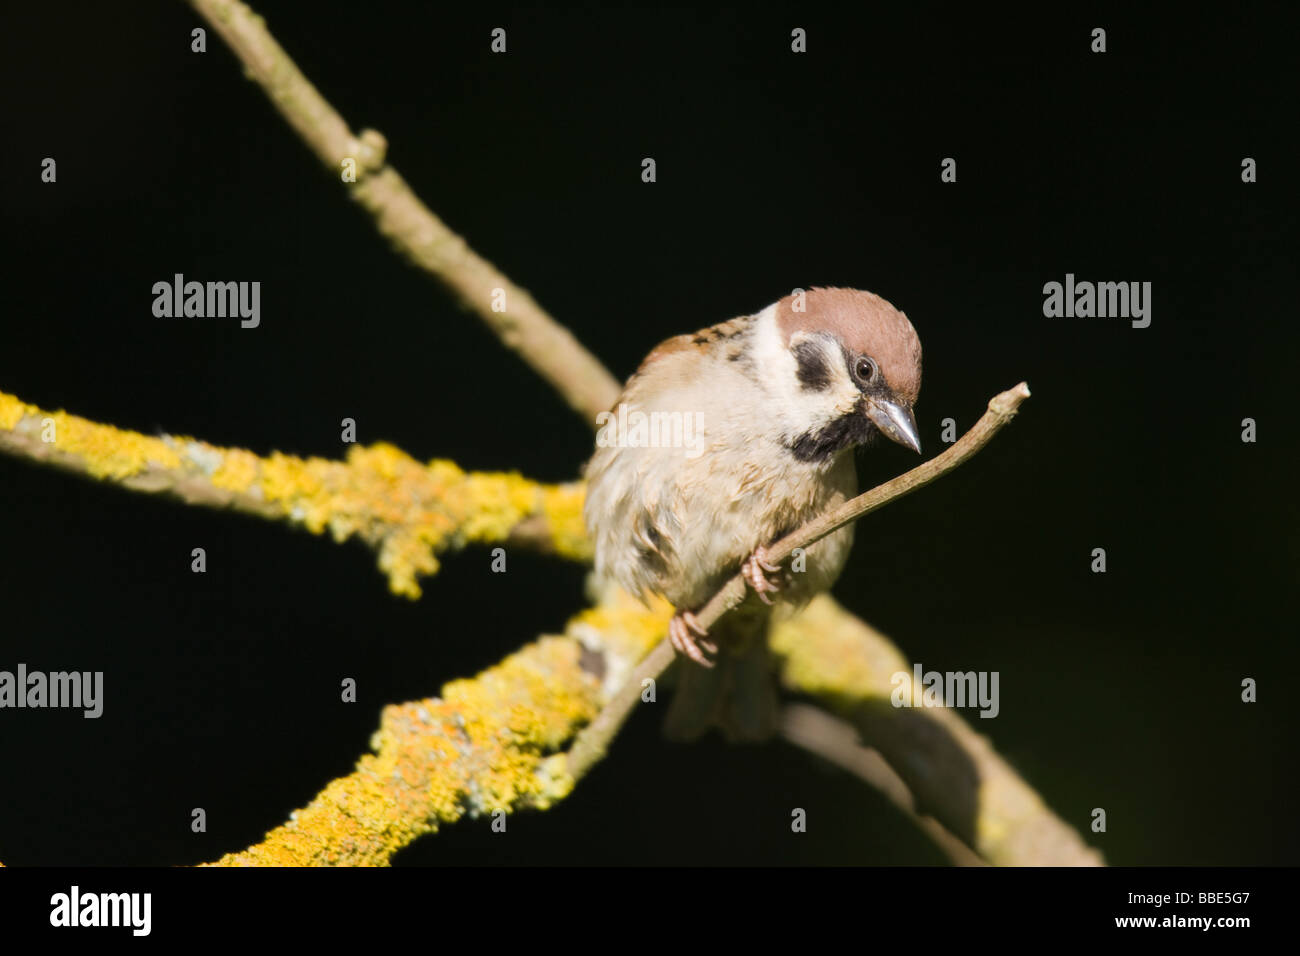 Adult Eurasian Tree Sparrow (Passer montanus) perched on lichen covered branch Stock Photo